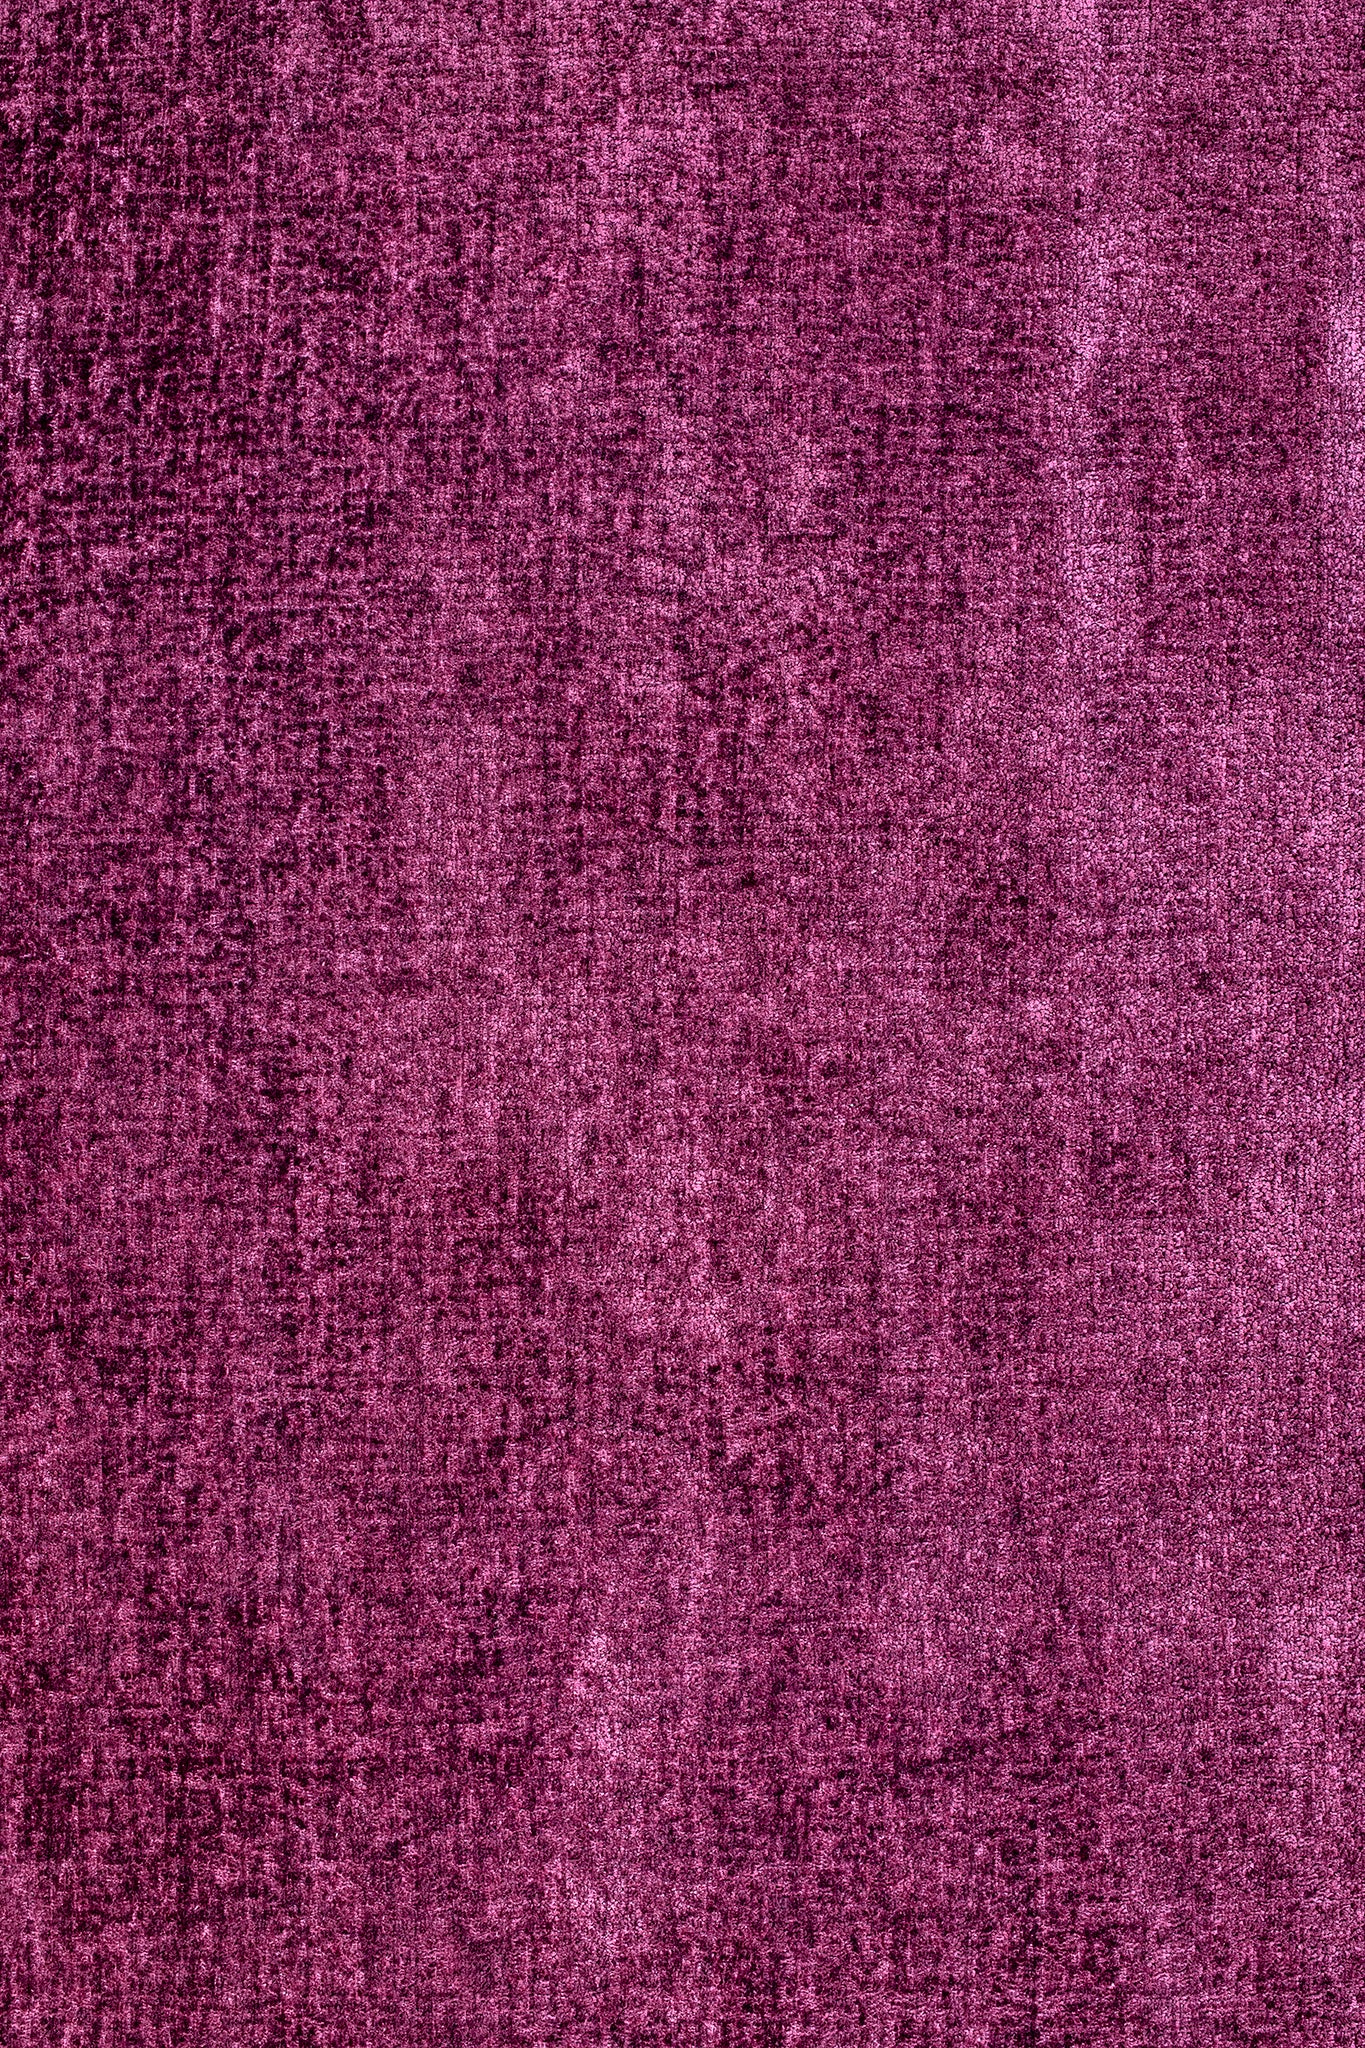 Magenta A1 Photography Backdrop - Textured Fabric